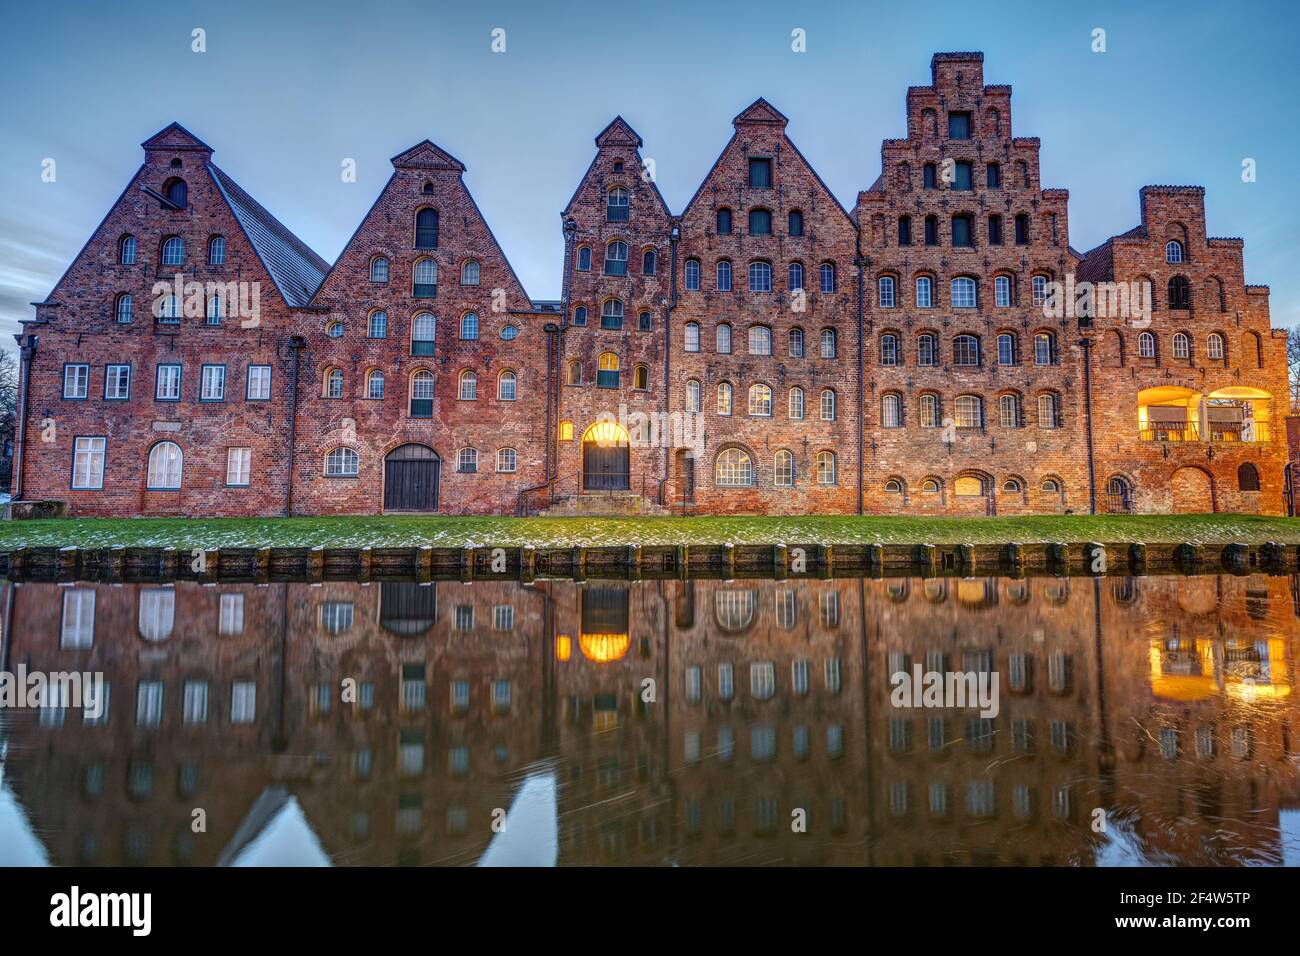 The old Salzspeicher reflecting in the Trave river at dawn, seen in Luebeck, Germany Stock Photo